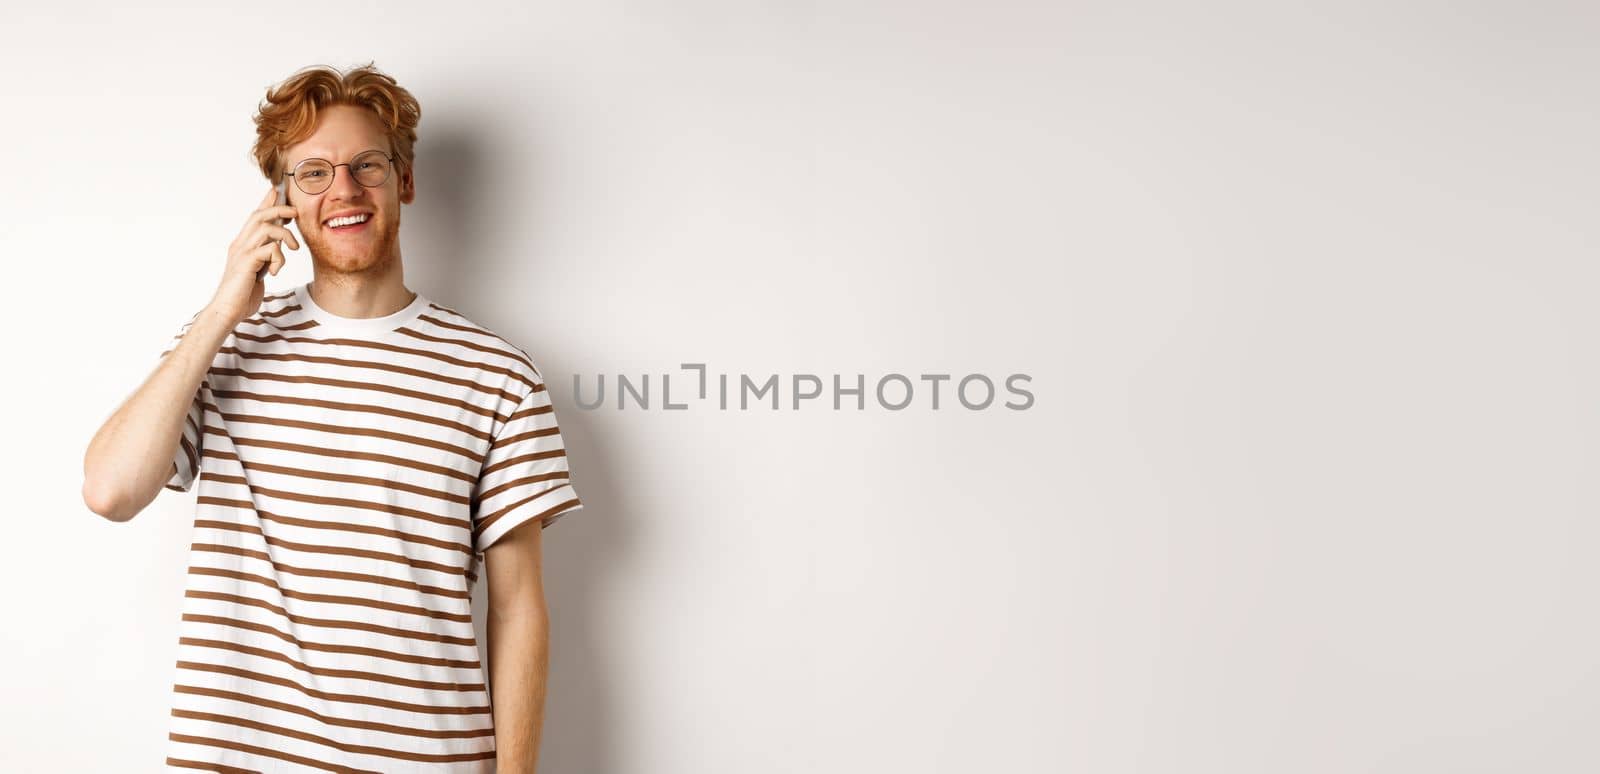 Hipster with red hair and glasses talking on mobile phone, smiling during conversation, white background.